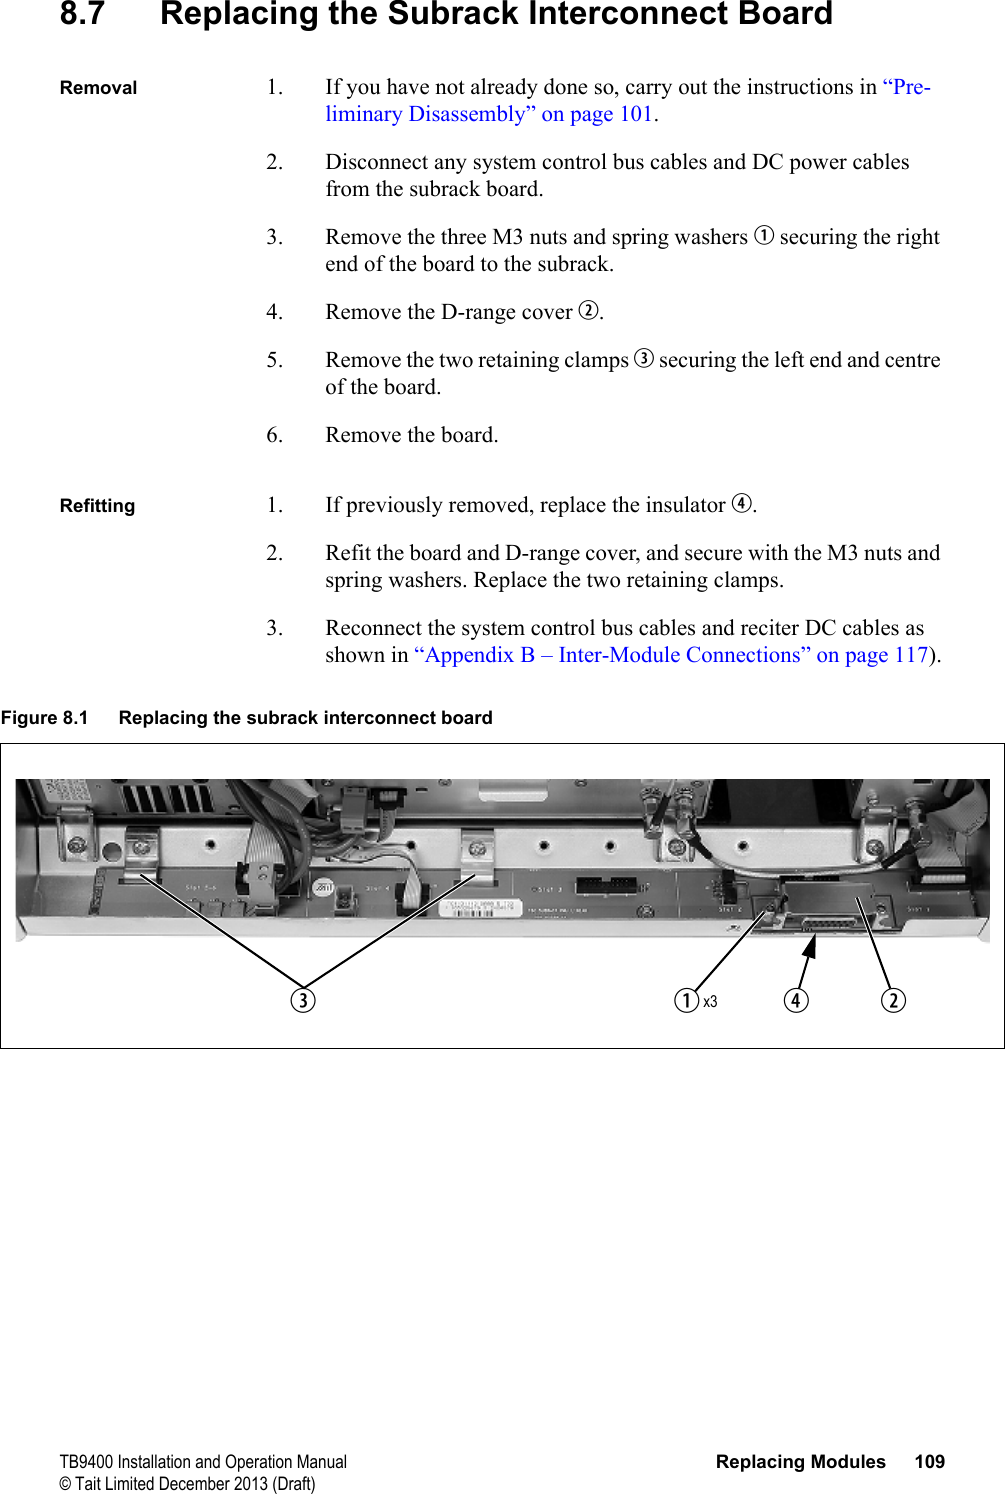  TB9400 Installation and Operation Manual Replacing Modules 109© Tait Limited December 2013 (Draft)8.7 Replacing the Subrack Interconnect BoardRemoval 1. If you have not already done so, carry out the instructions in “Pre-liminary Disassembly” on page 101.2. Disconnect any system control bus cables and DC power cables from the subrack board.3. Remove the three M3 nuts and spring washers b securing the right end of the board to the subrack.4. Remove the D-range cover c.5. Remove the two retaining clamps d securing the left end and centre of the board.6. Remove the board.Refitting 1. If previously removed, replace the insulator e.2. Refit the board and D-range cover, and secure with the M3 nuts and spring washers. Replace the two retaining clamps.3. Reconnect the system control bus cables and reciter DC cables as shown in “Appendix B – Inter-Module Connections” on page 117).Figure 8.1 Replacing the subrack interconnect boardbecdx3